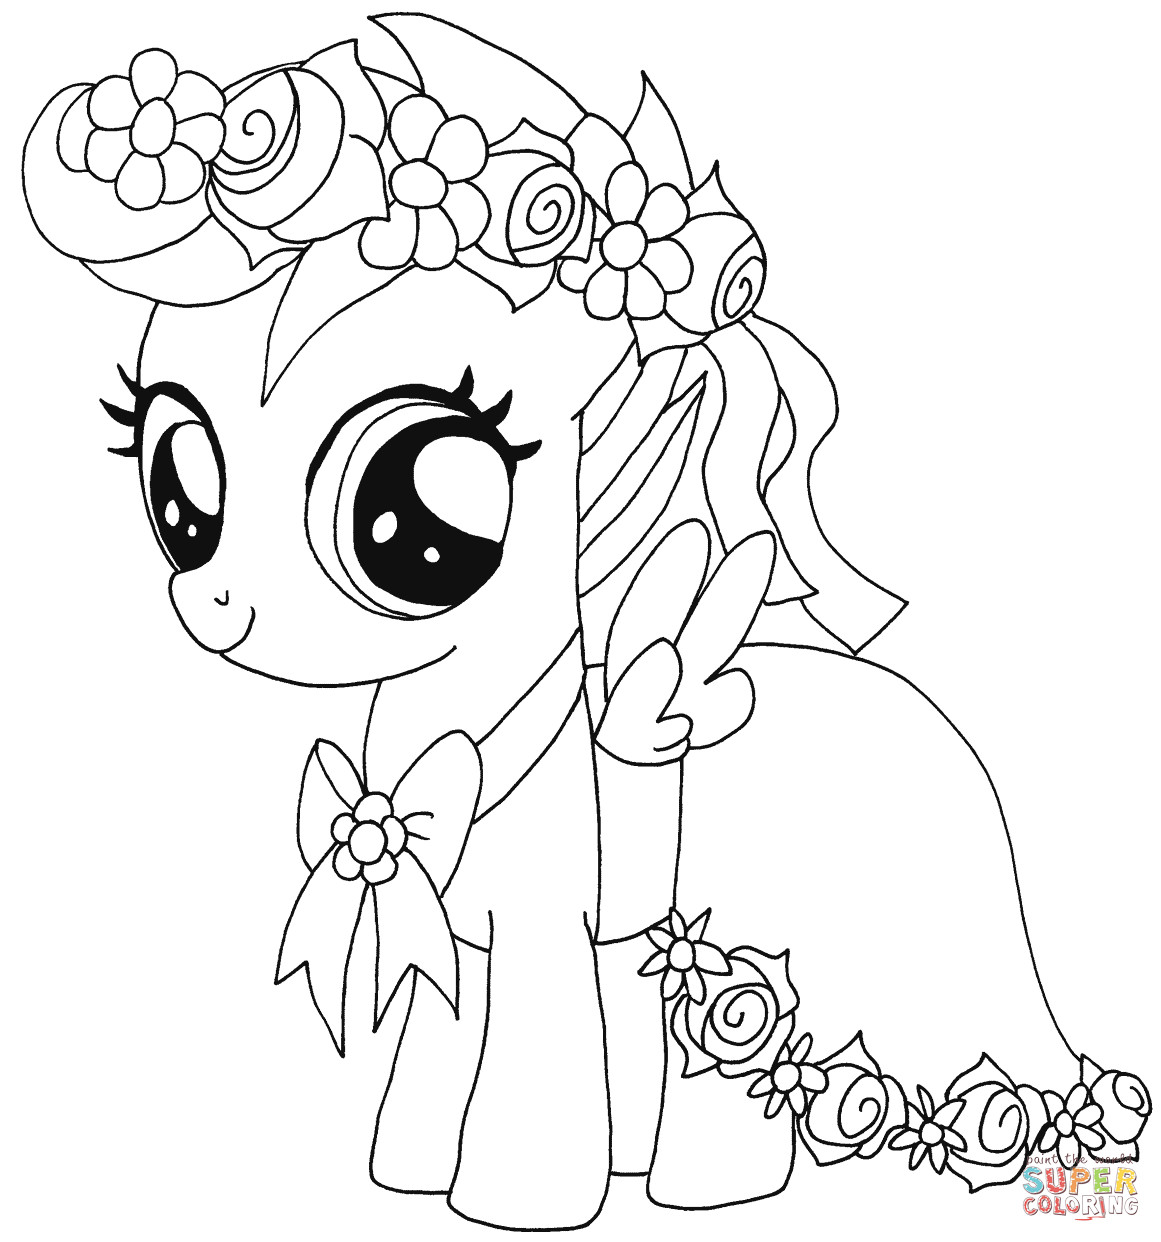 Mlp Coloring Book
 My Little Pony Scootaloo coloring page